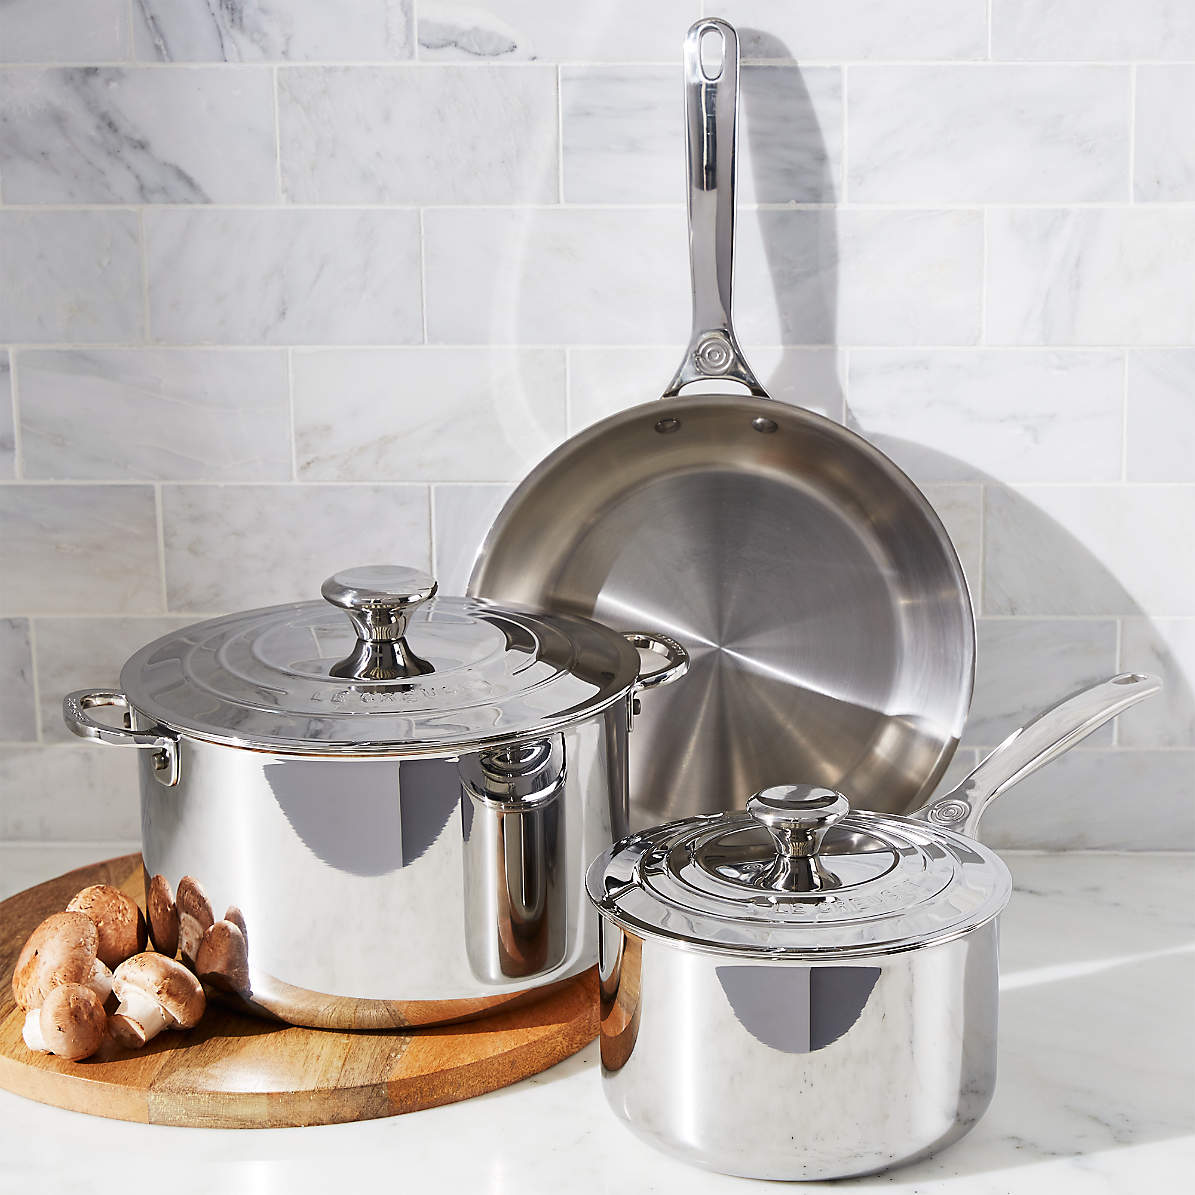 Le 5-Piece Stainless Steel Cookware Set + | Crate & Barrel